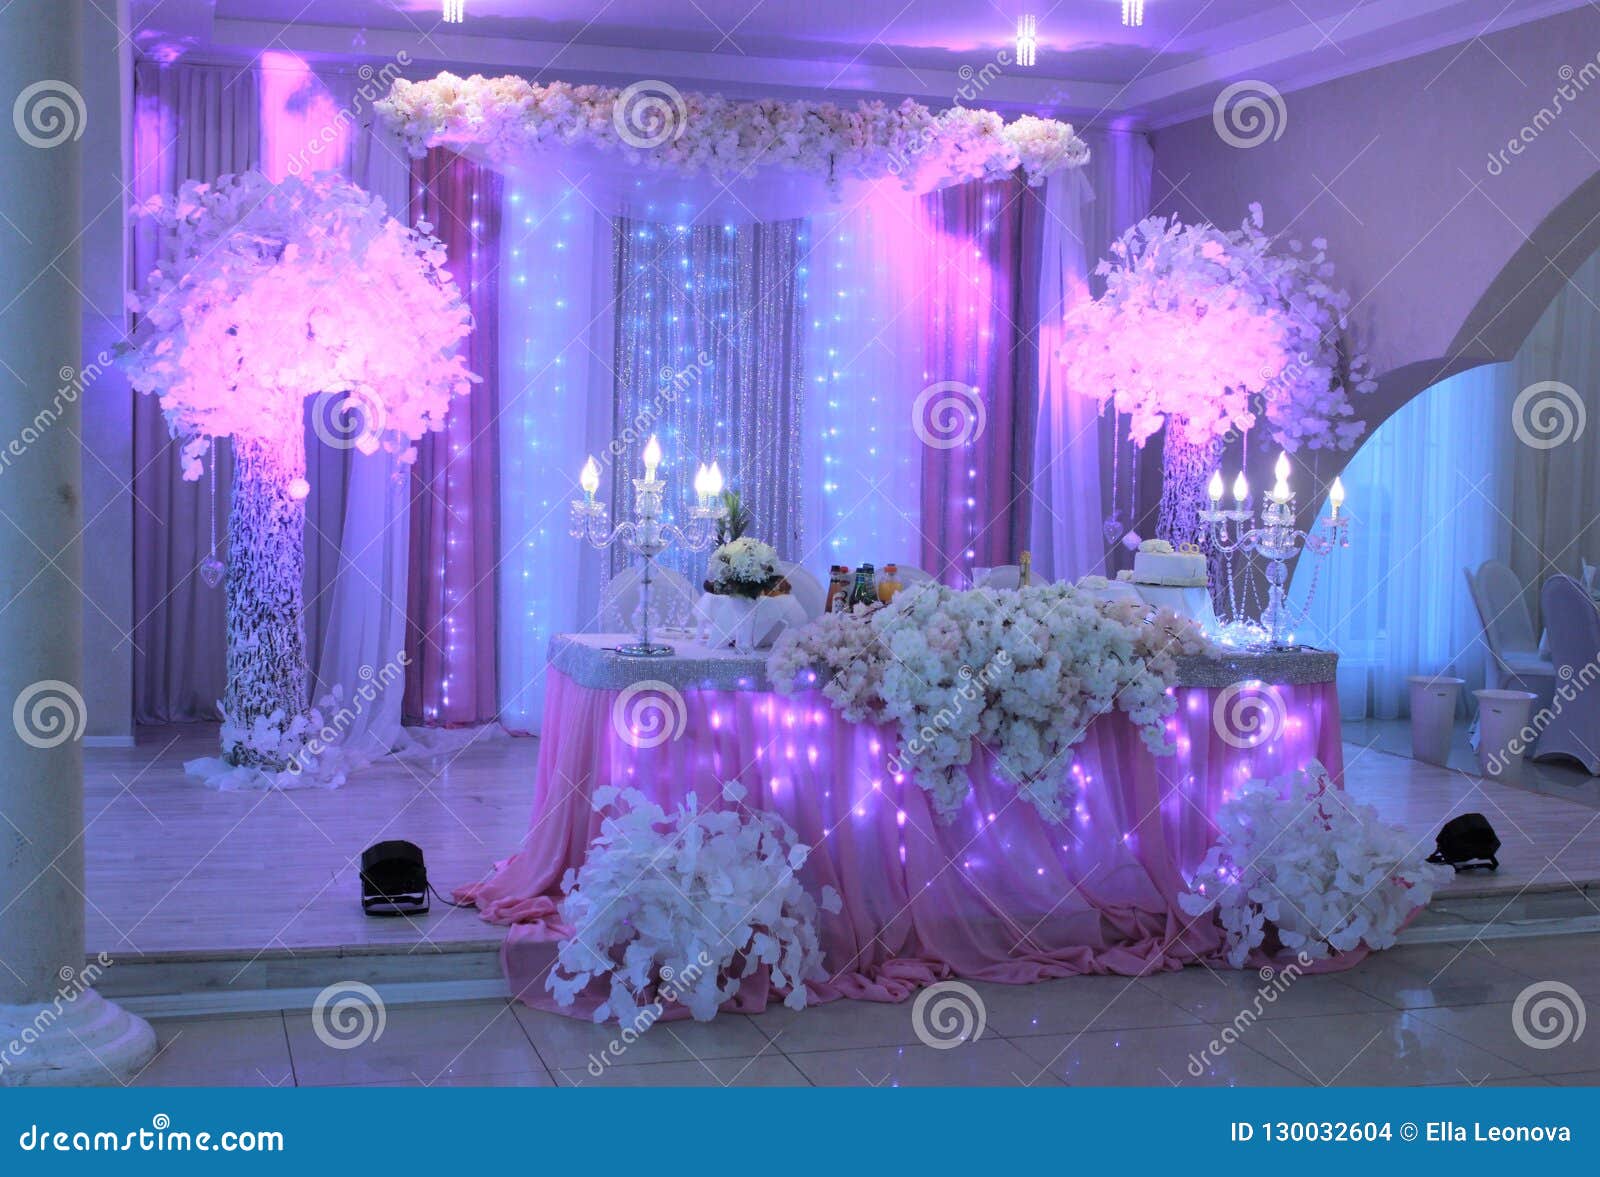 Wedding Reception Decoration In White And Pink Colours Stock